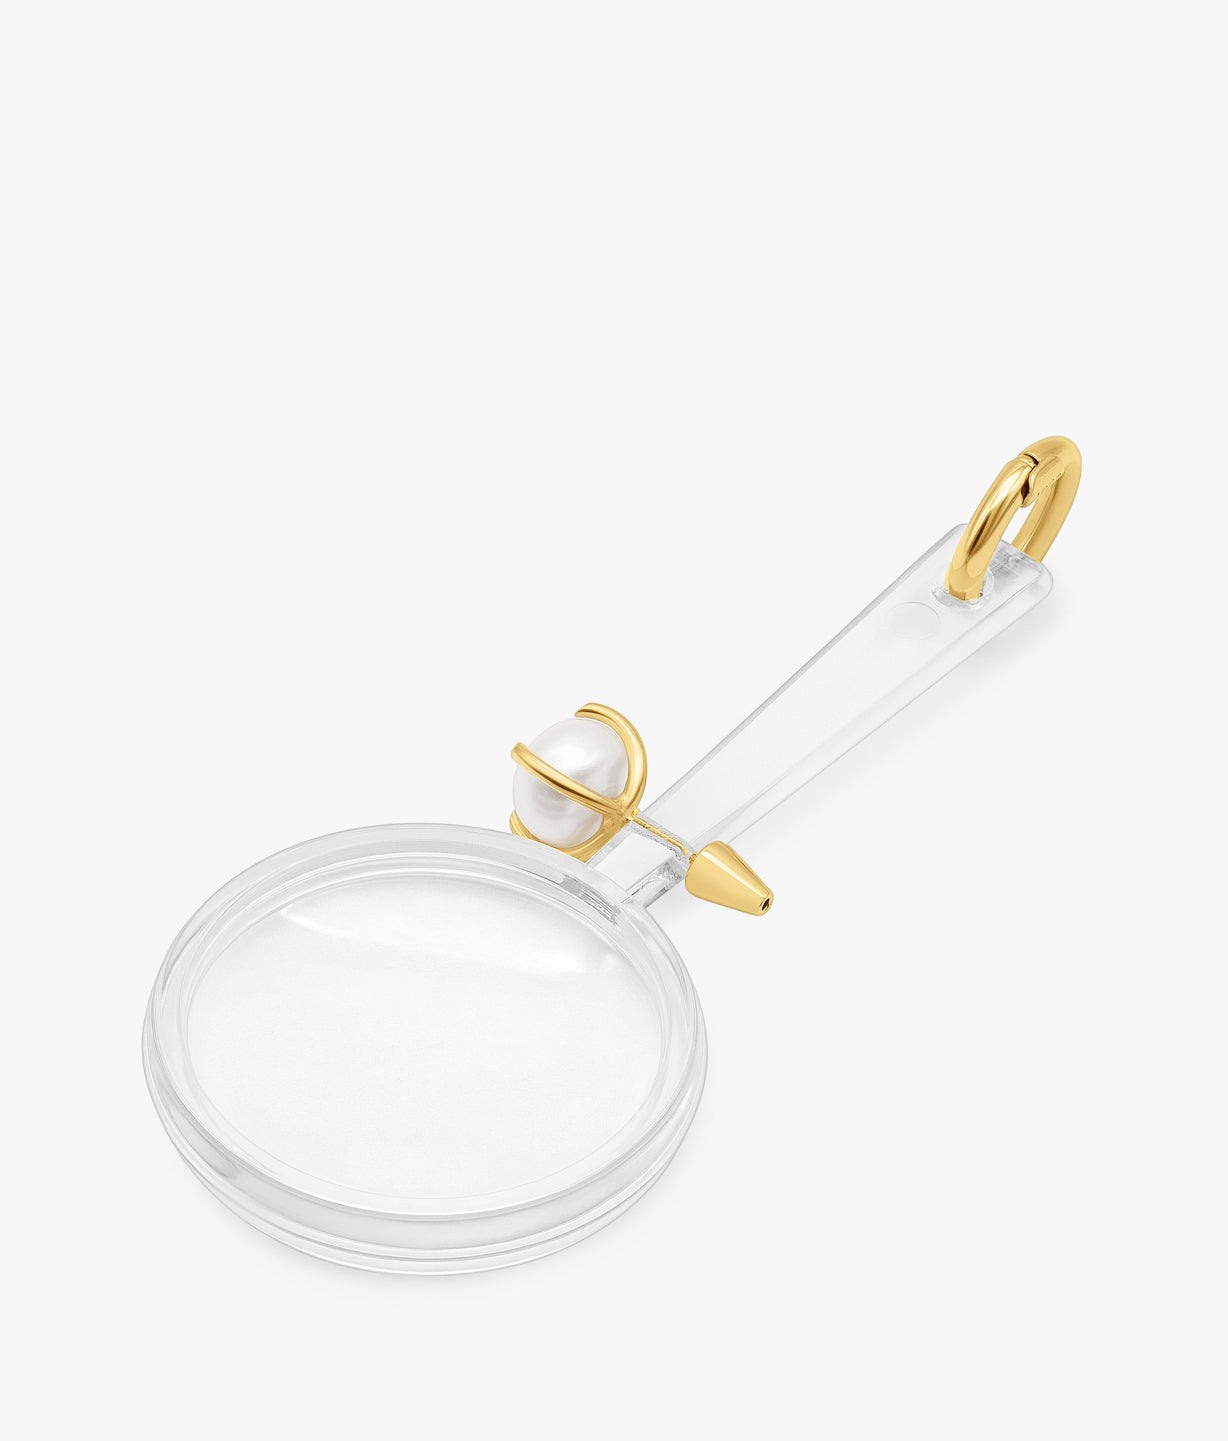 Magnifying glass with Hold and Pearl